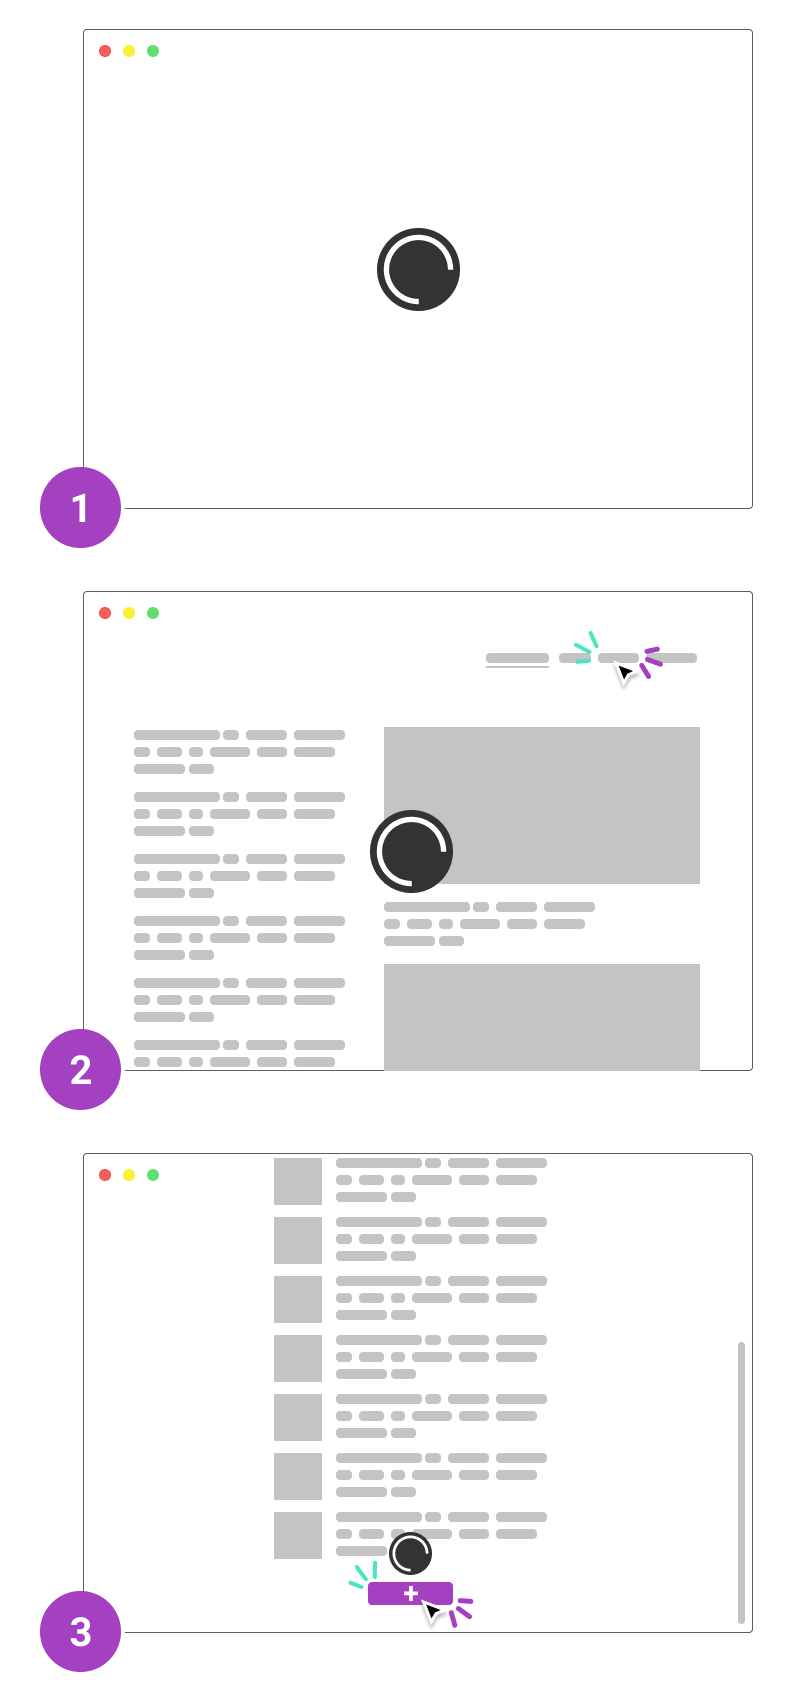 Three wireframes, one showing a loading circle on top of a blank page to show the initial loading of a website, the second one showing the loader on top a loaded page after a click on a menu item illustrating a subsequent load, and the final one showing a loader after a click on a button at the bottom of a list to illustrate a scoped loading